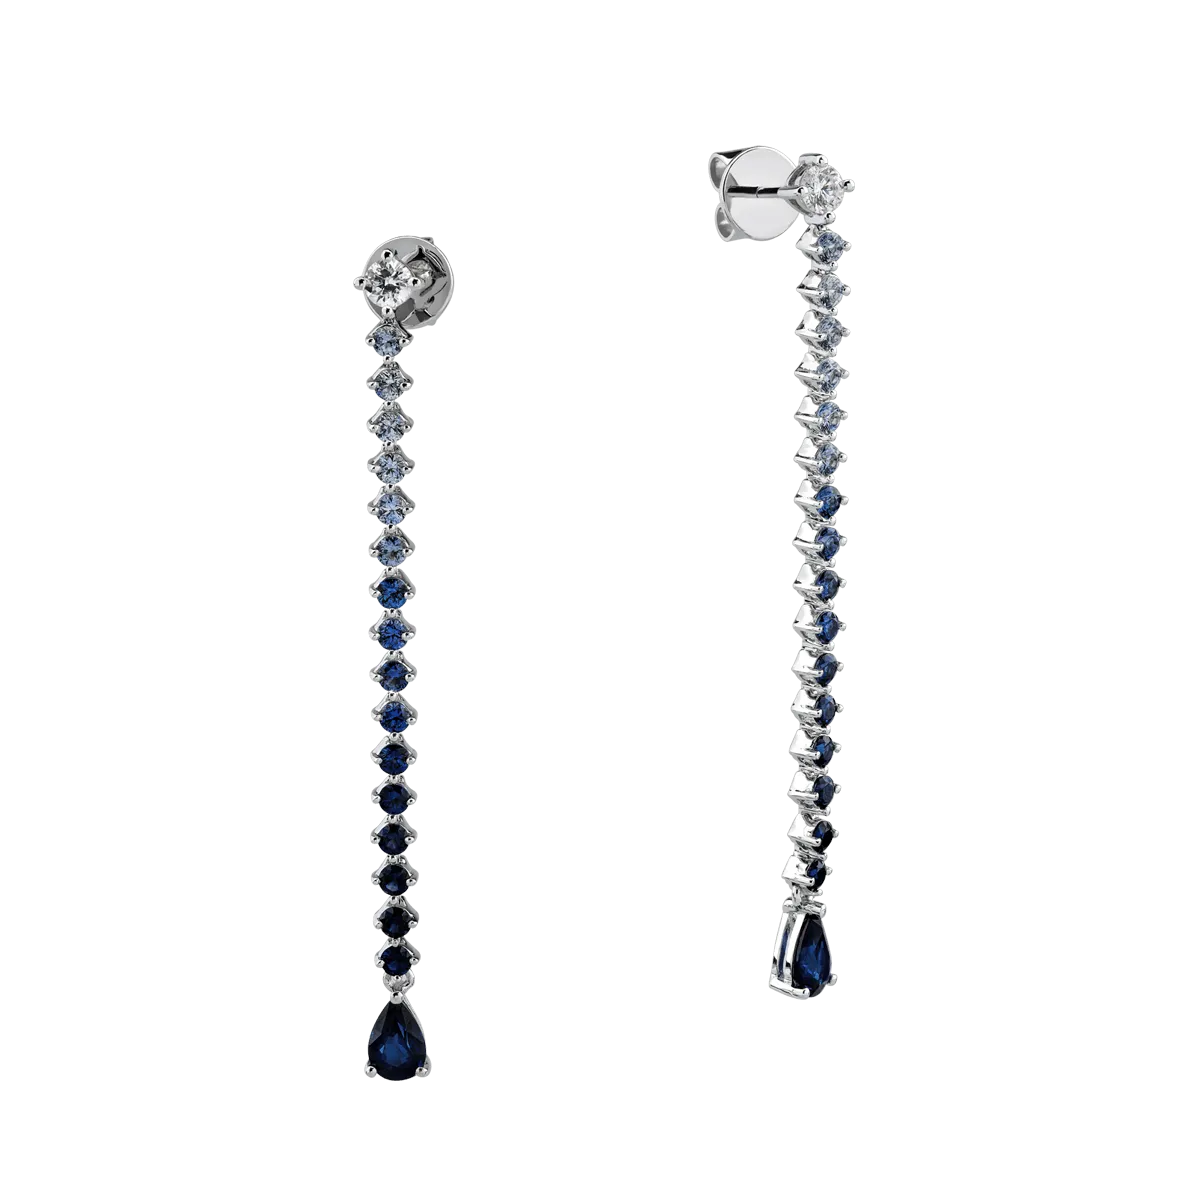 18K white gold earrings with 2.48ct sapphires and 0.31ct diamonds